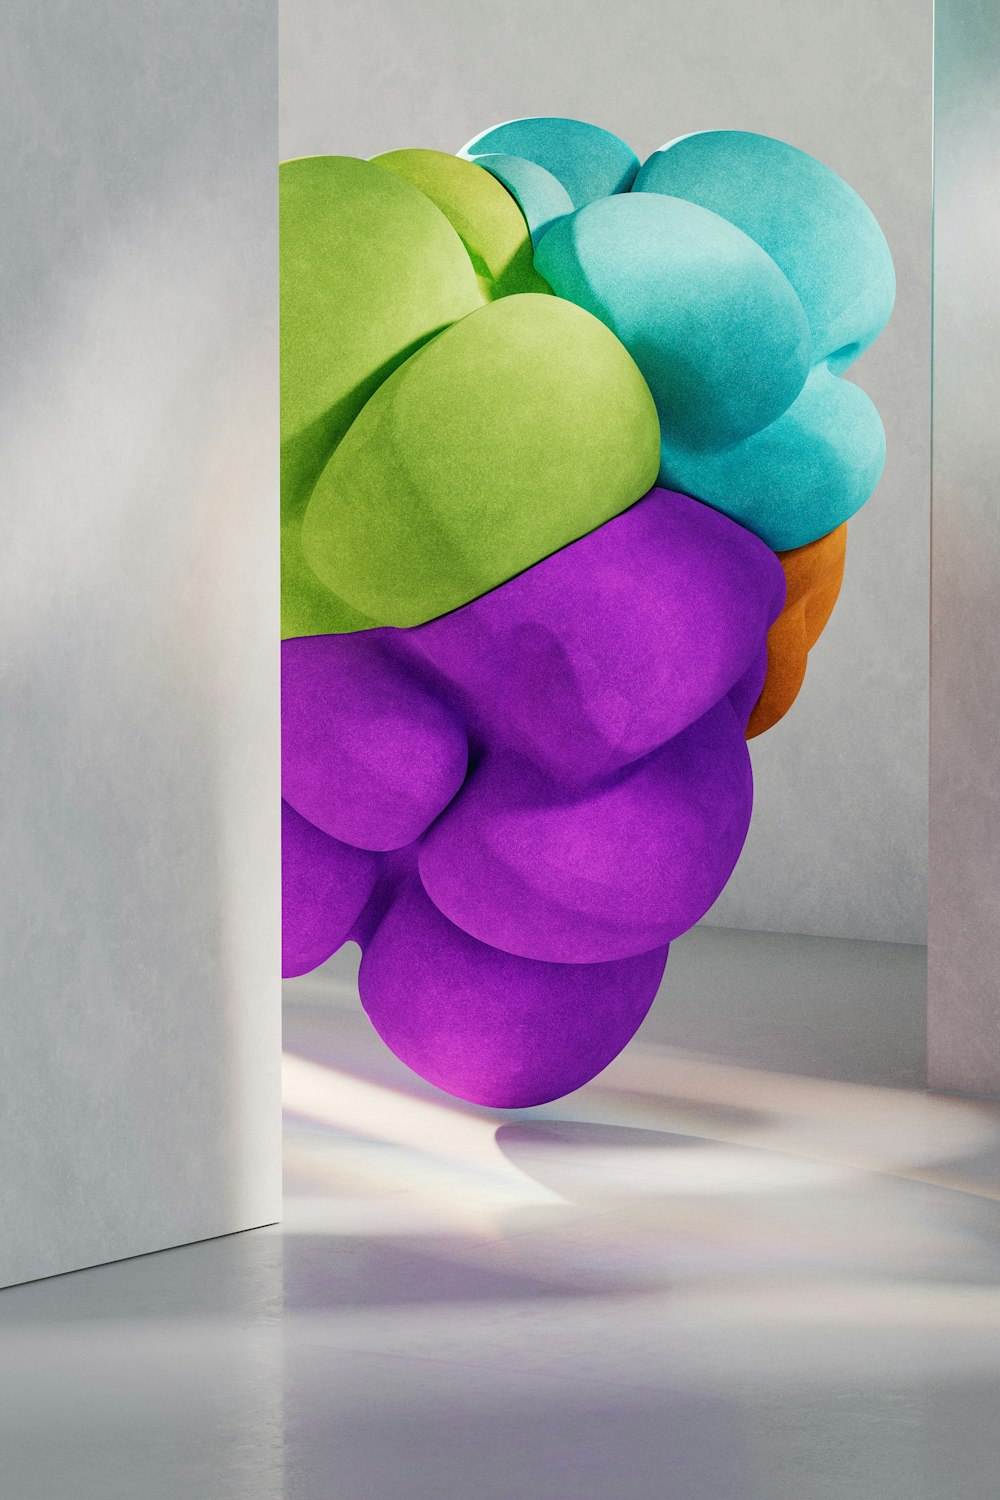 a colorful sculpture is shown in a white room